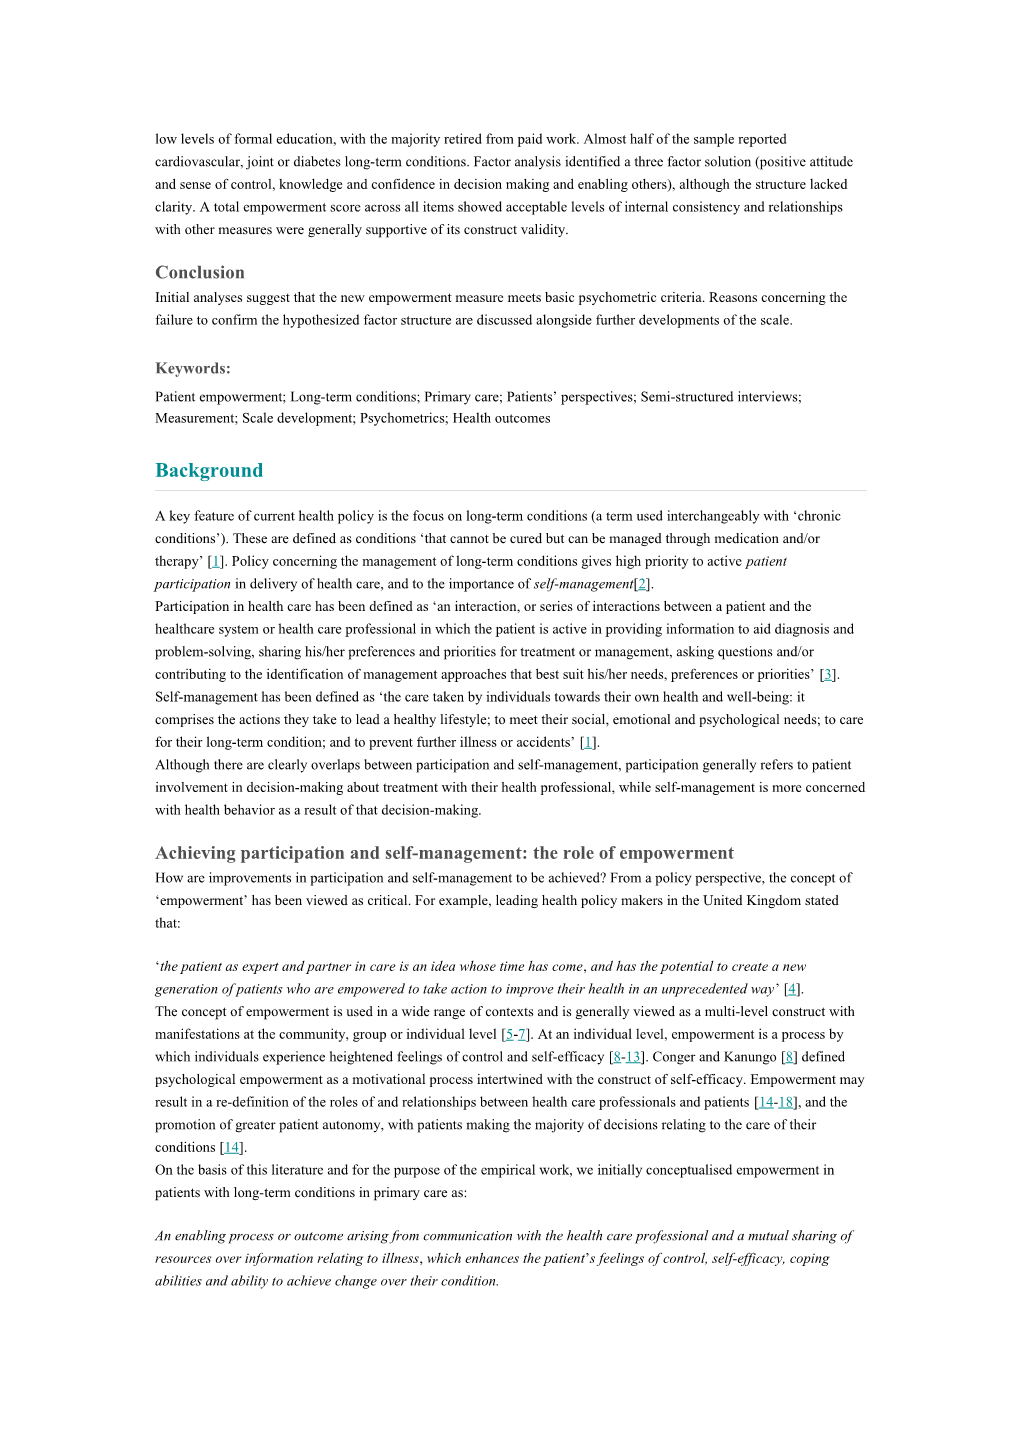 The Development of the Equip (Empowerment Questionnaire for In-Patients): a New Questionnaire